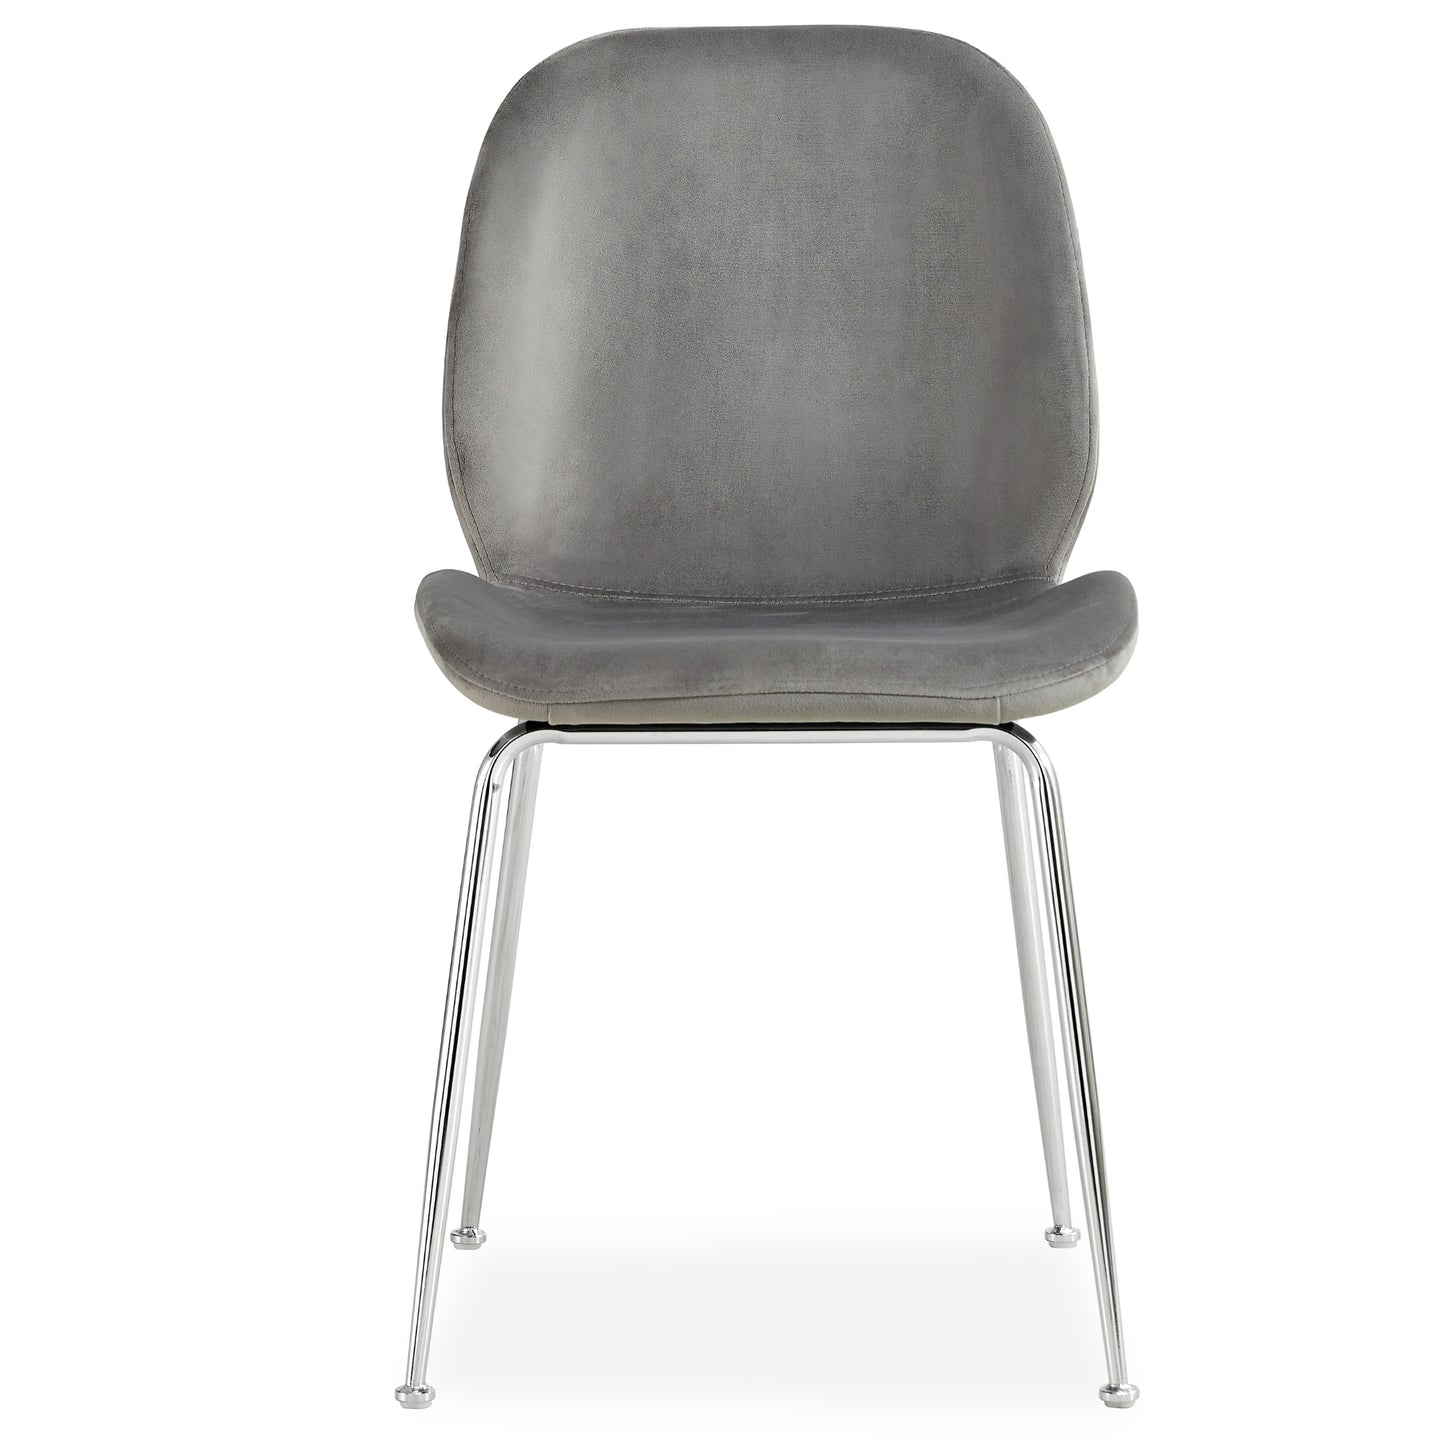 Remy Dining Chair Set of 4 Fabric Seat with Metal Frame - Grey